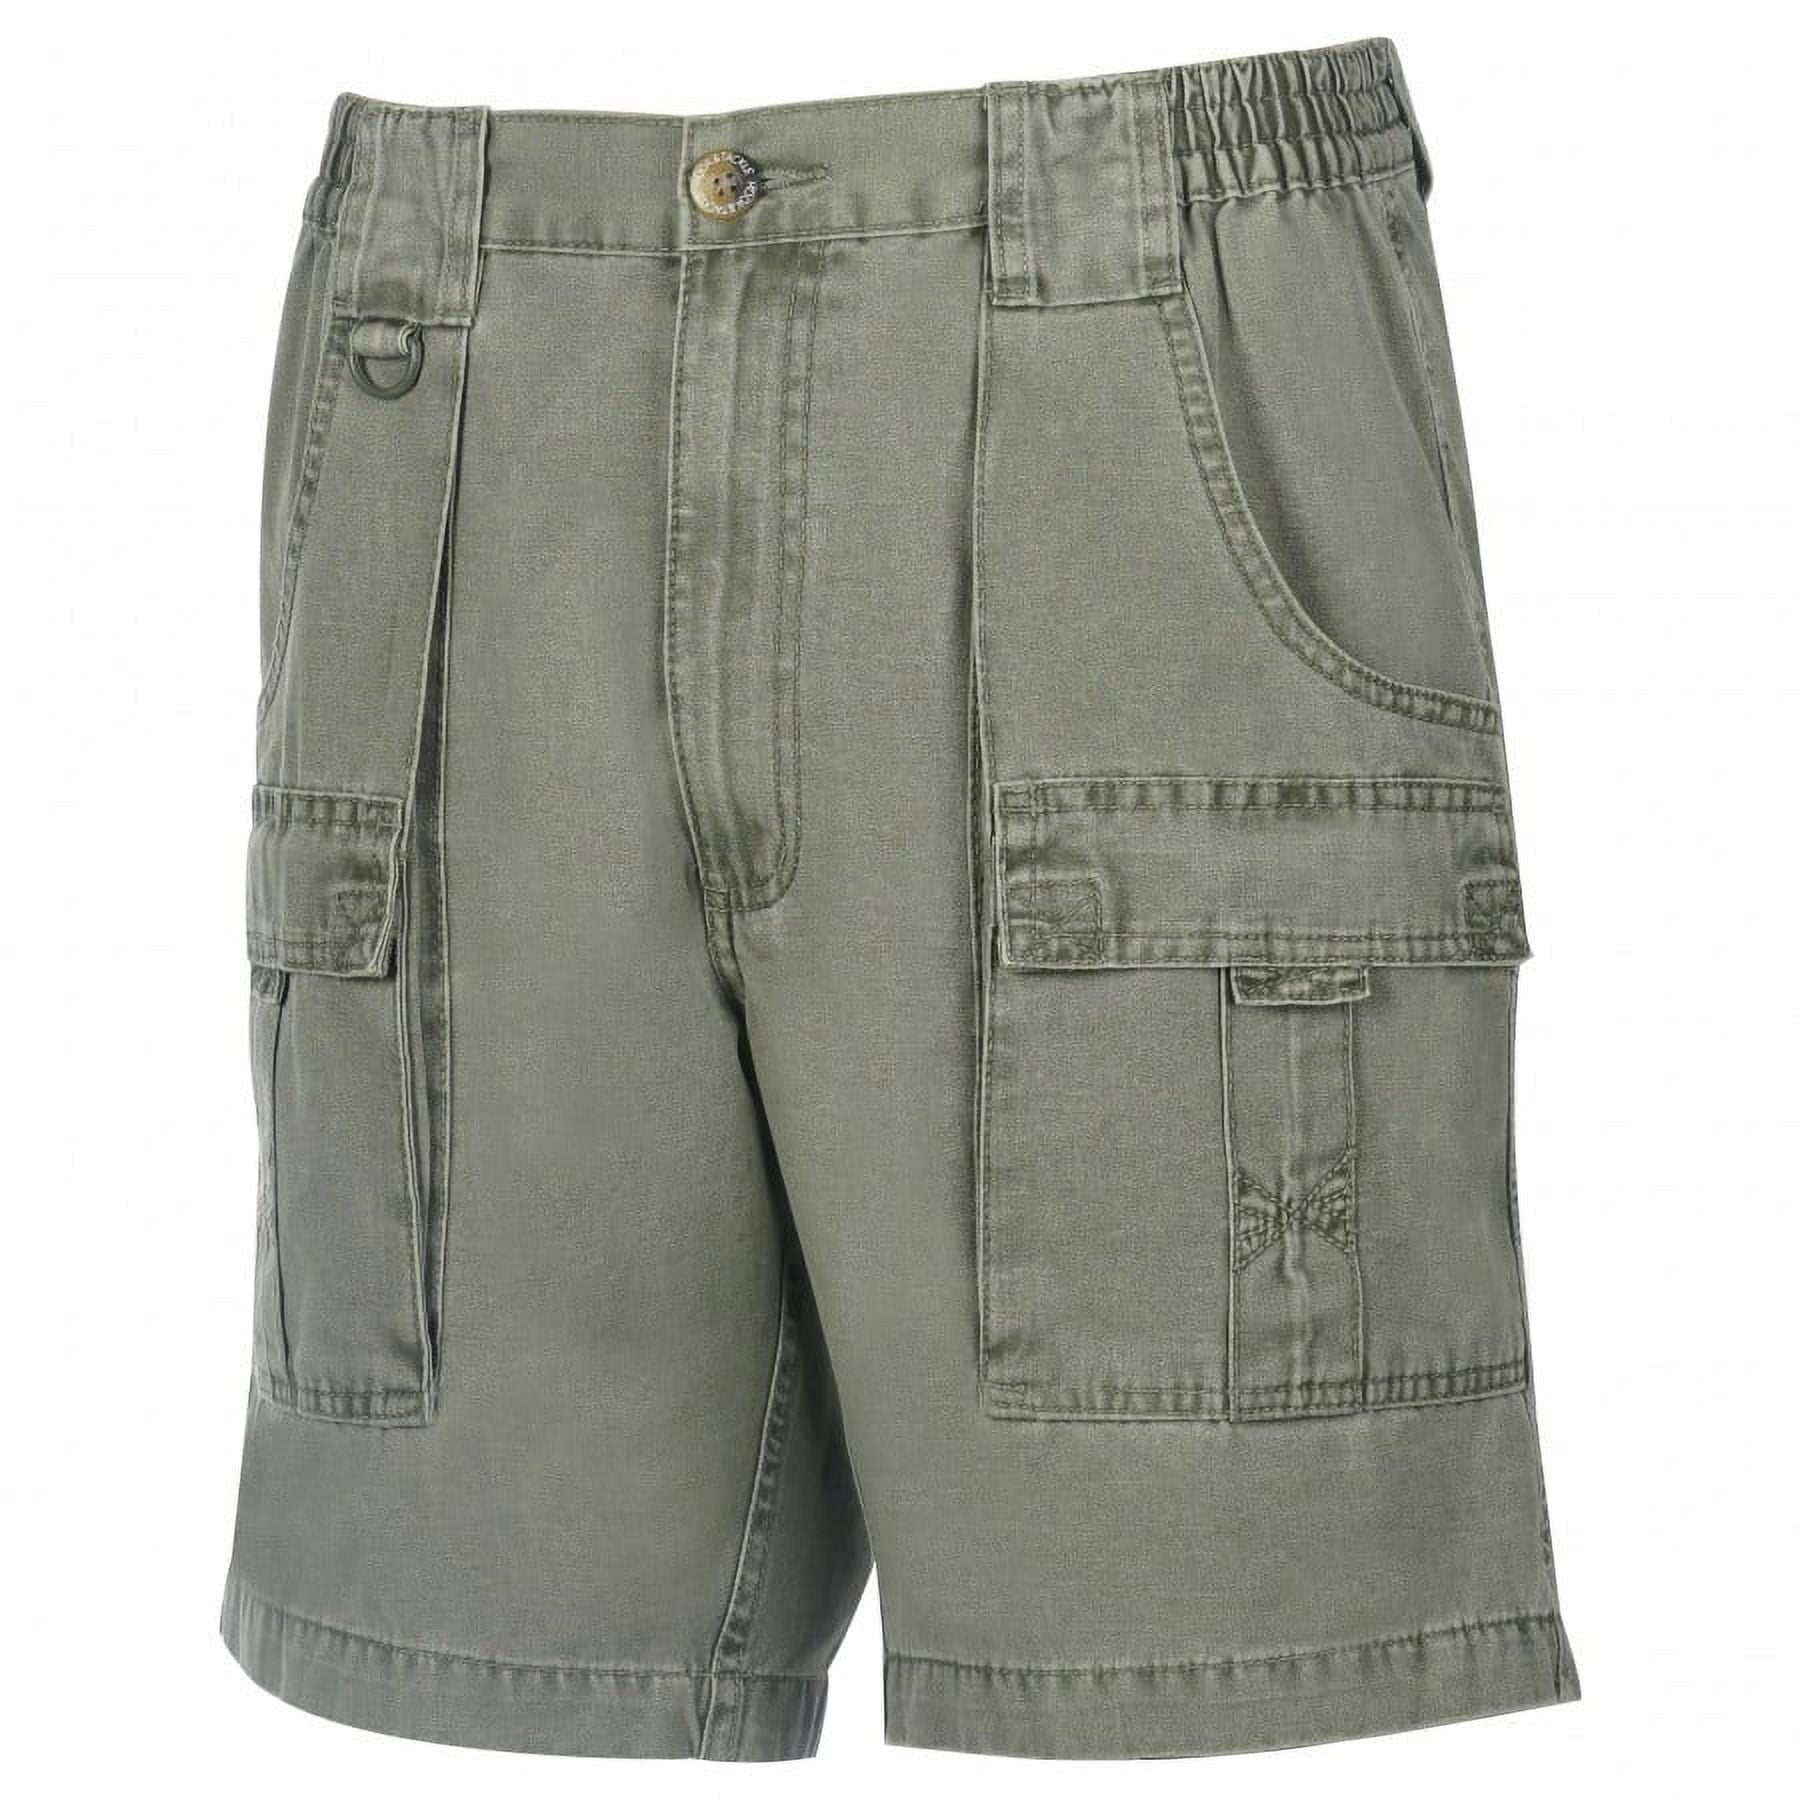 Hook & Tackle Beer Can Cargo and Cell Phone Pocket Fishing Shorts